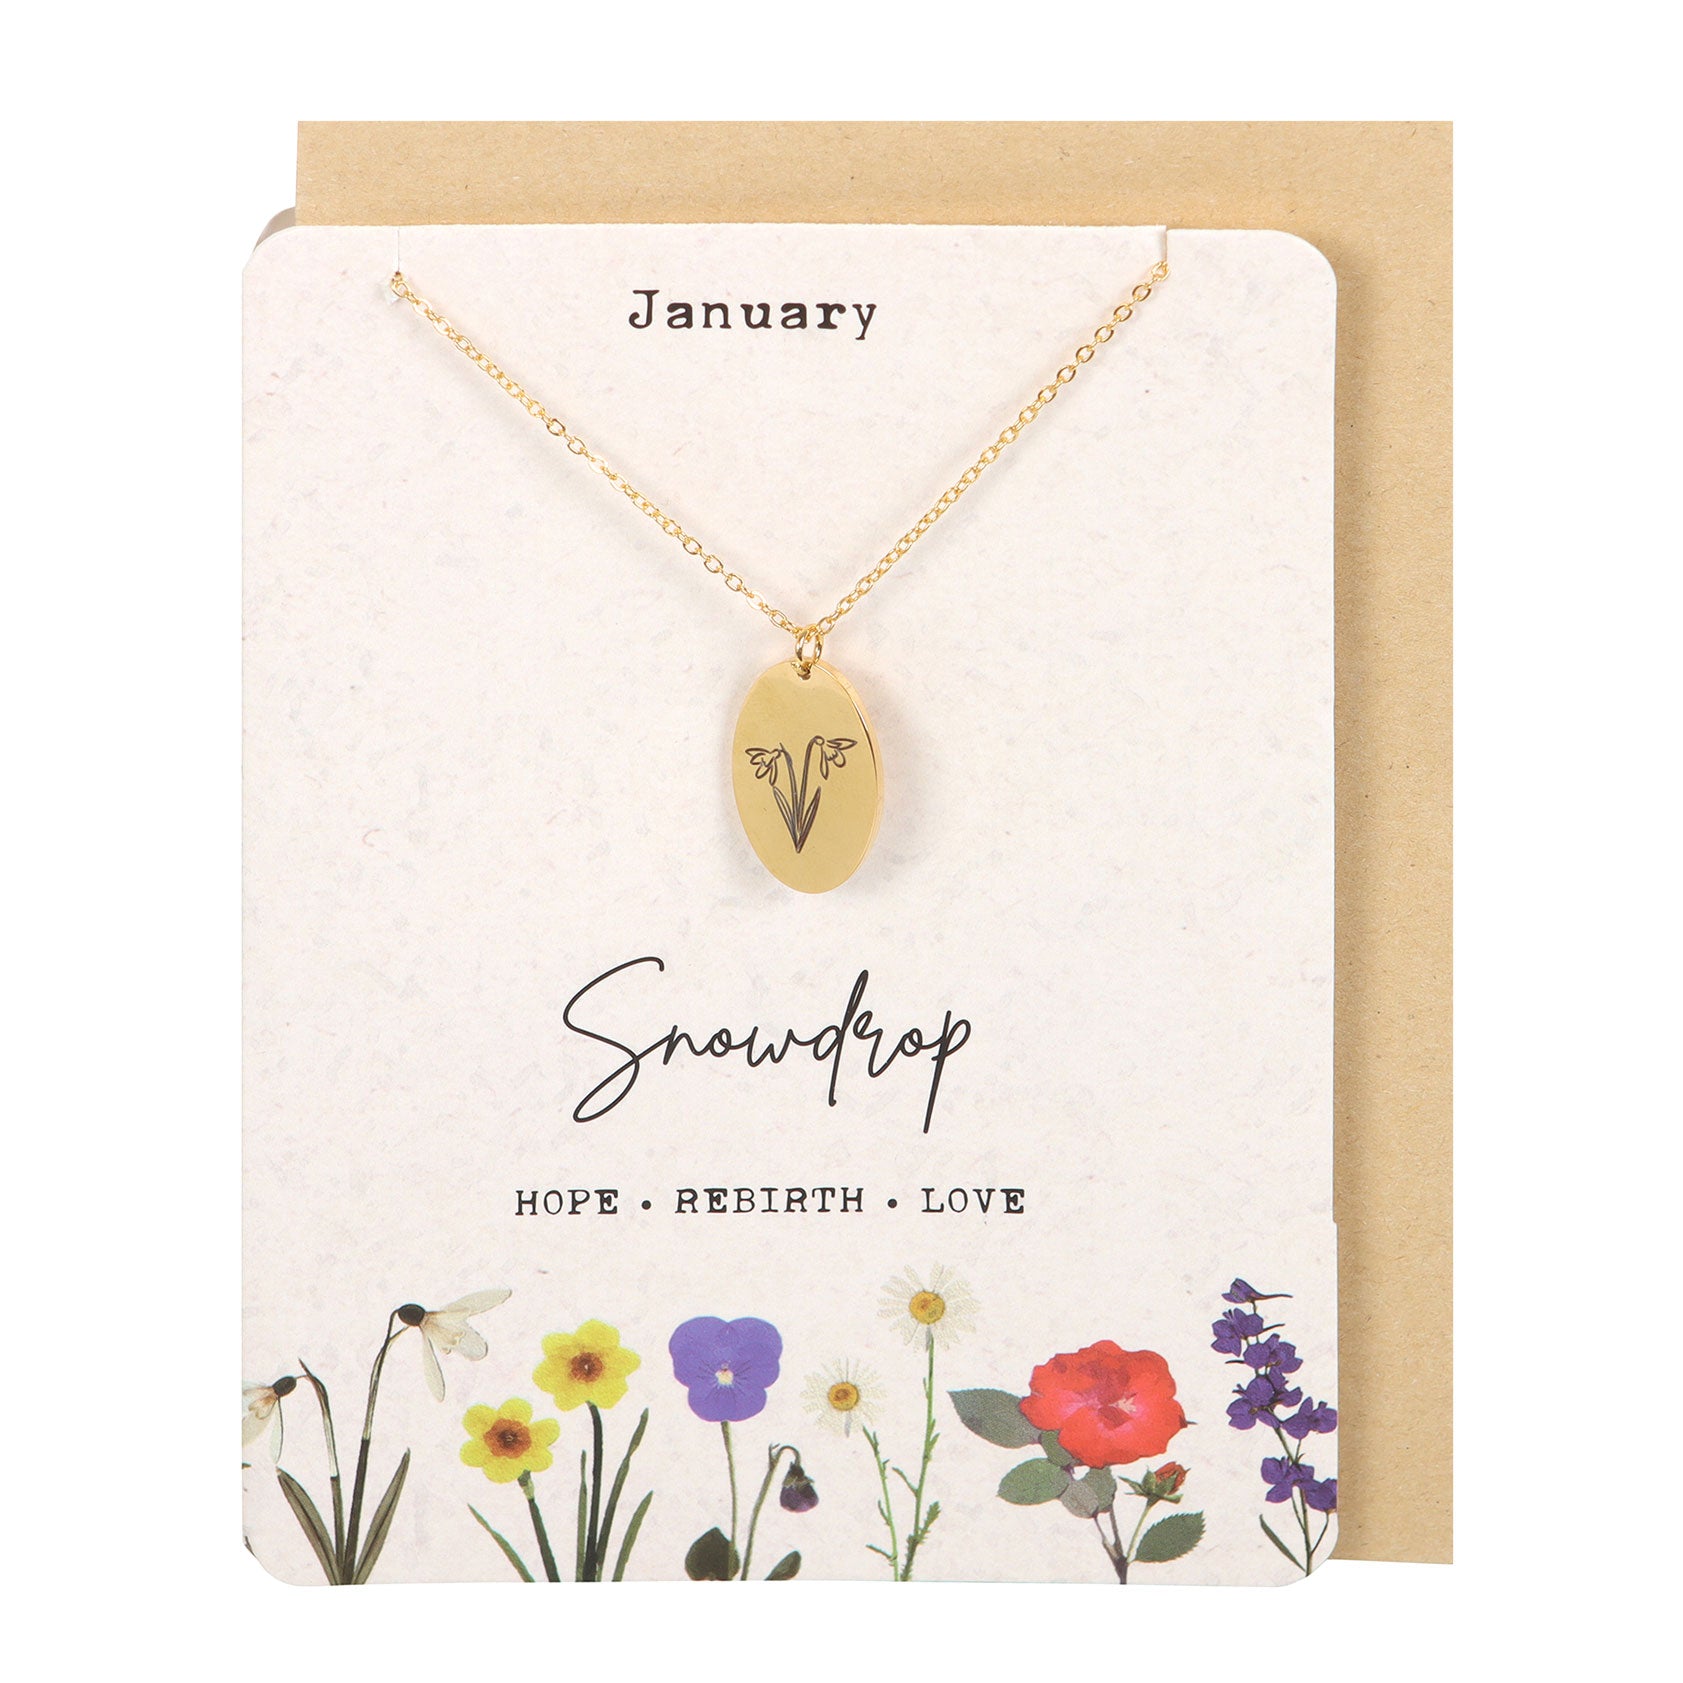 View January Snowdrop Birth Flower Necklace Card information